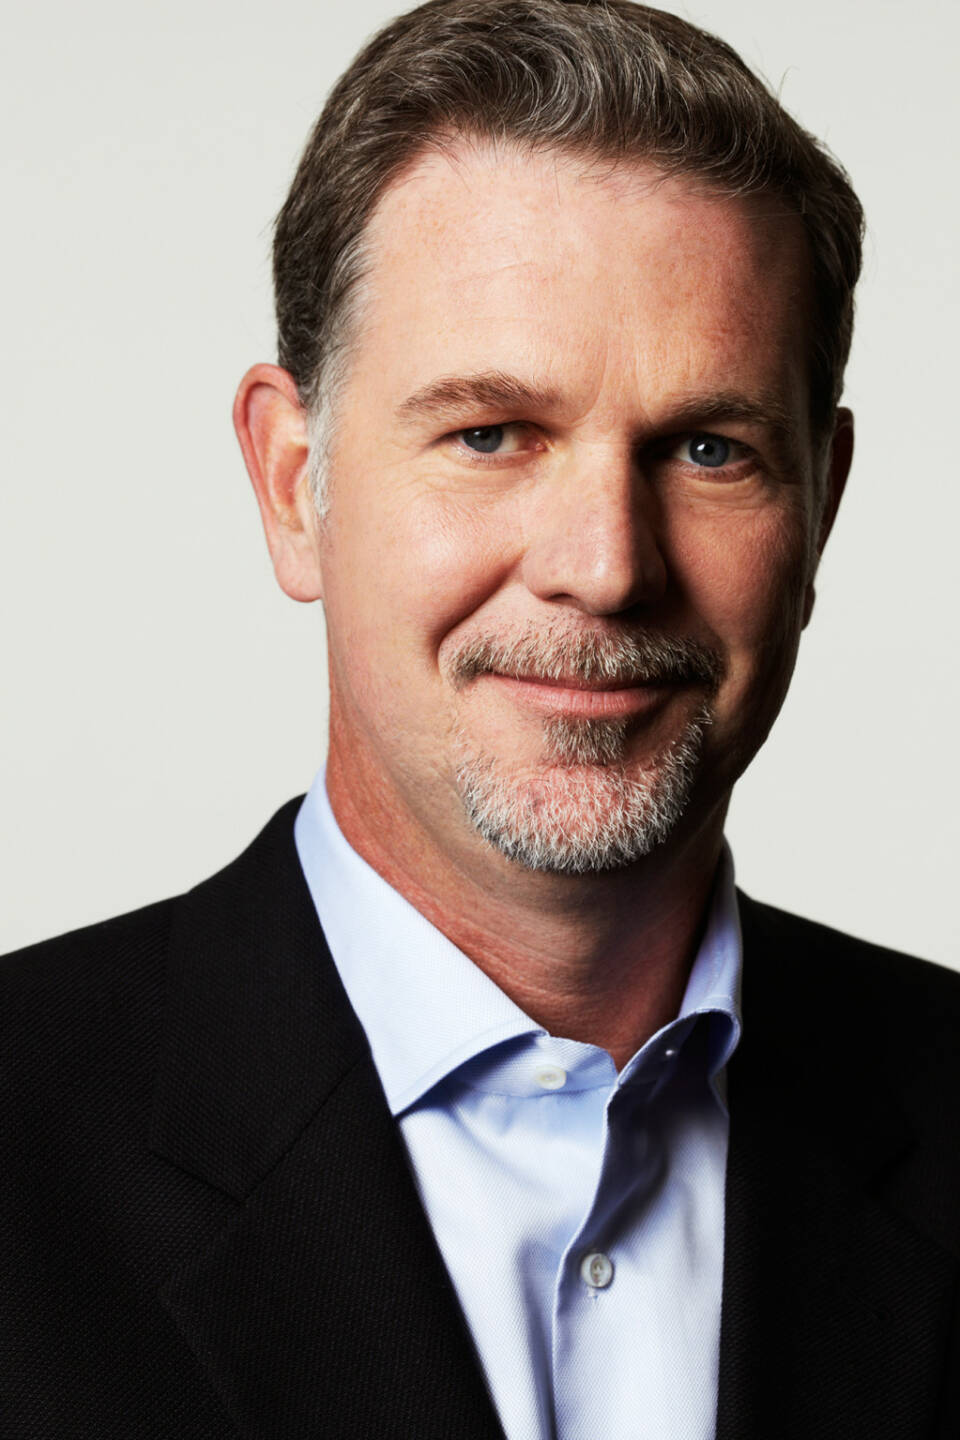 Reed Hastings, Co-Founder and CEO Netflix Inc.